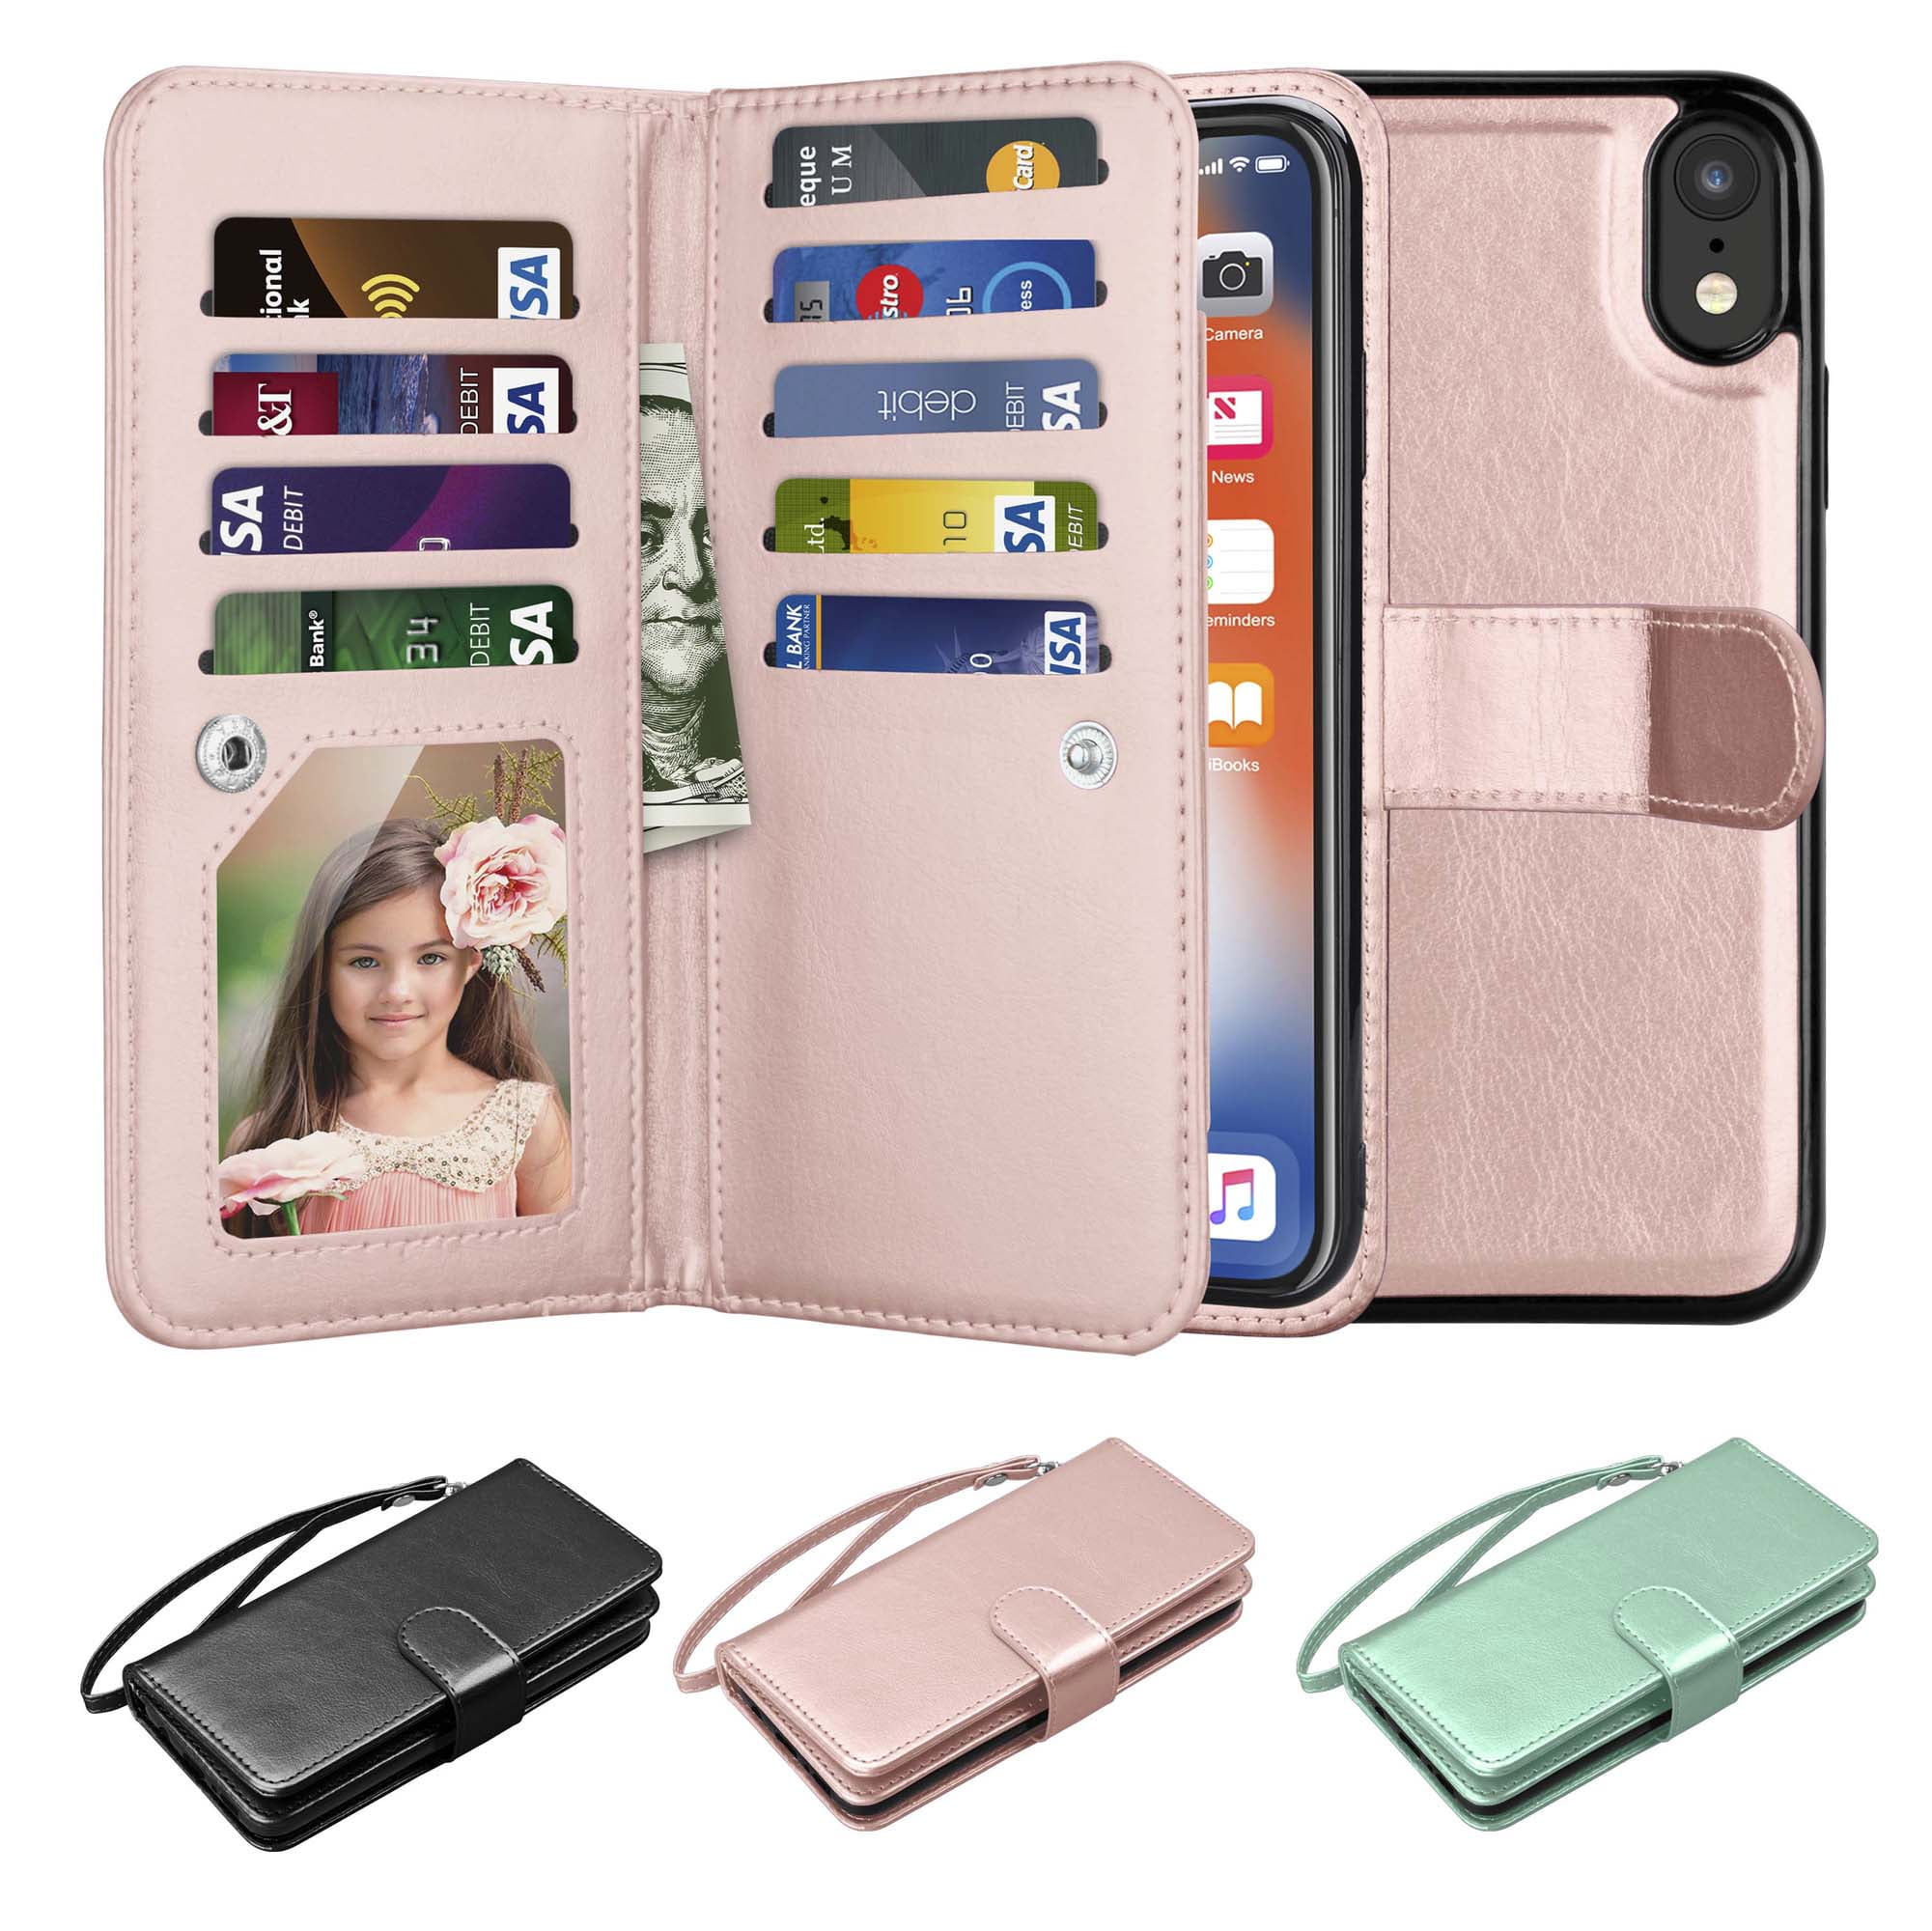 Grey PHEZEN Case for iPhone XR Wallet Case,Embossing Mandala Flower PU Leather Magnetic Folio Flip Case Full Body Protective Phone Case Cover with Stand Card Slot Wrist Strap for iPhone XR